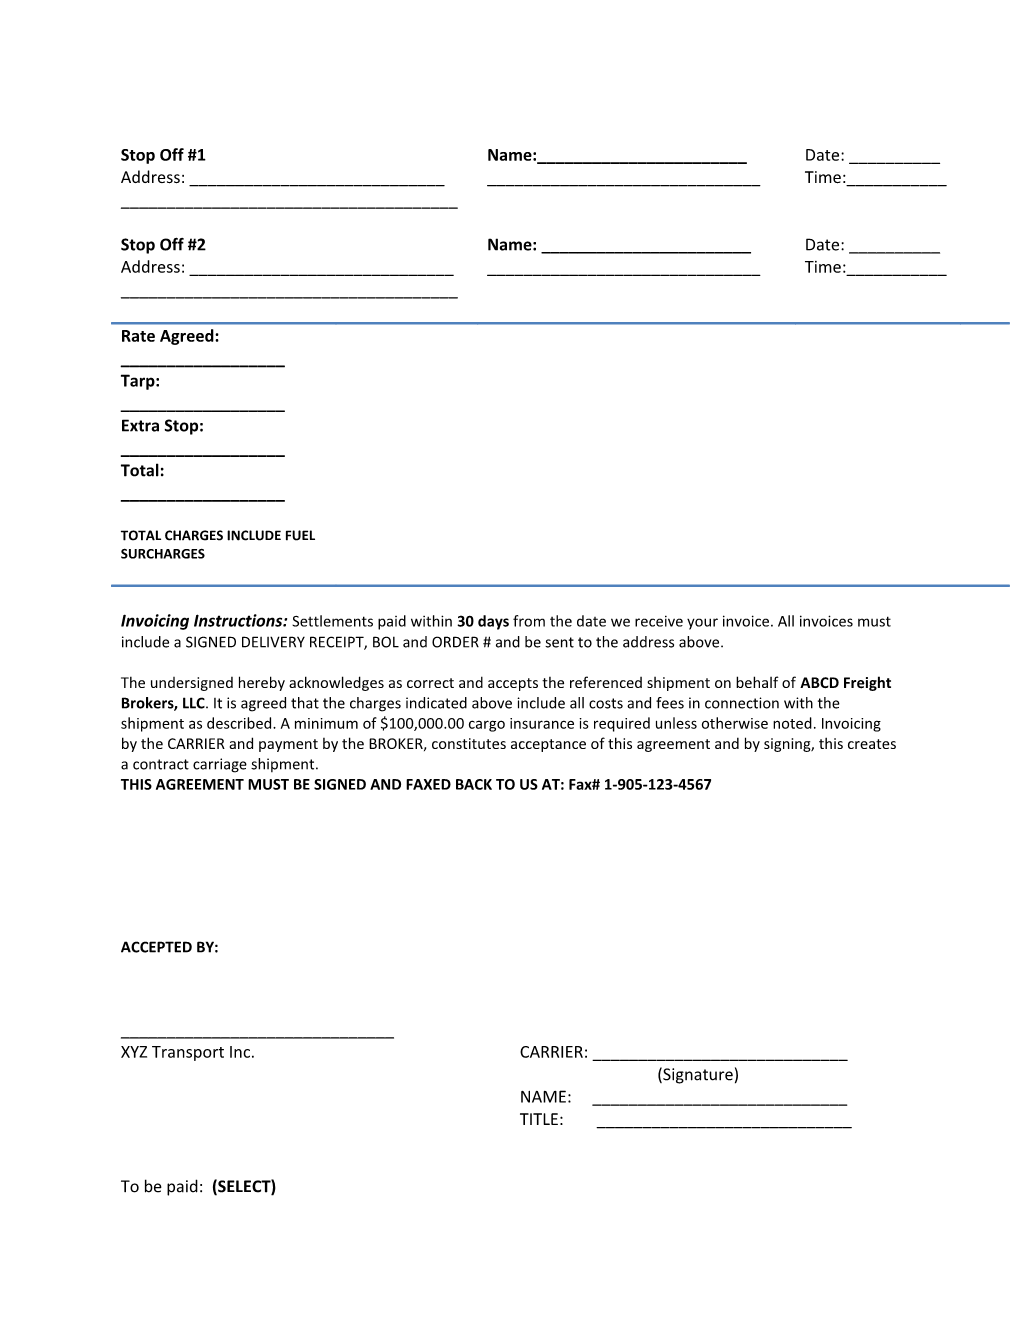 Load Confirmation & Rate Agreement